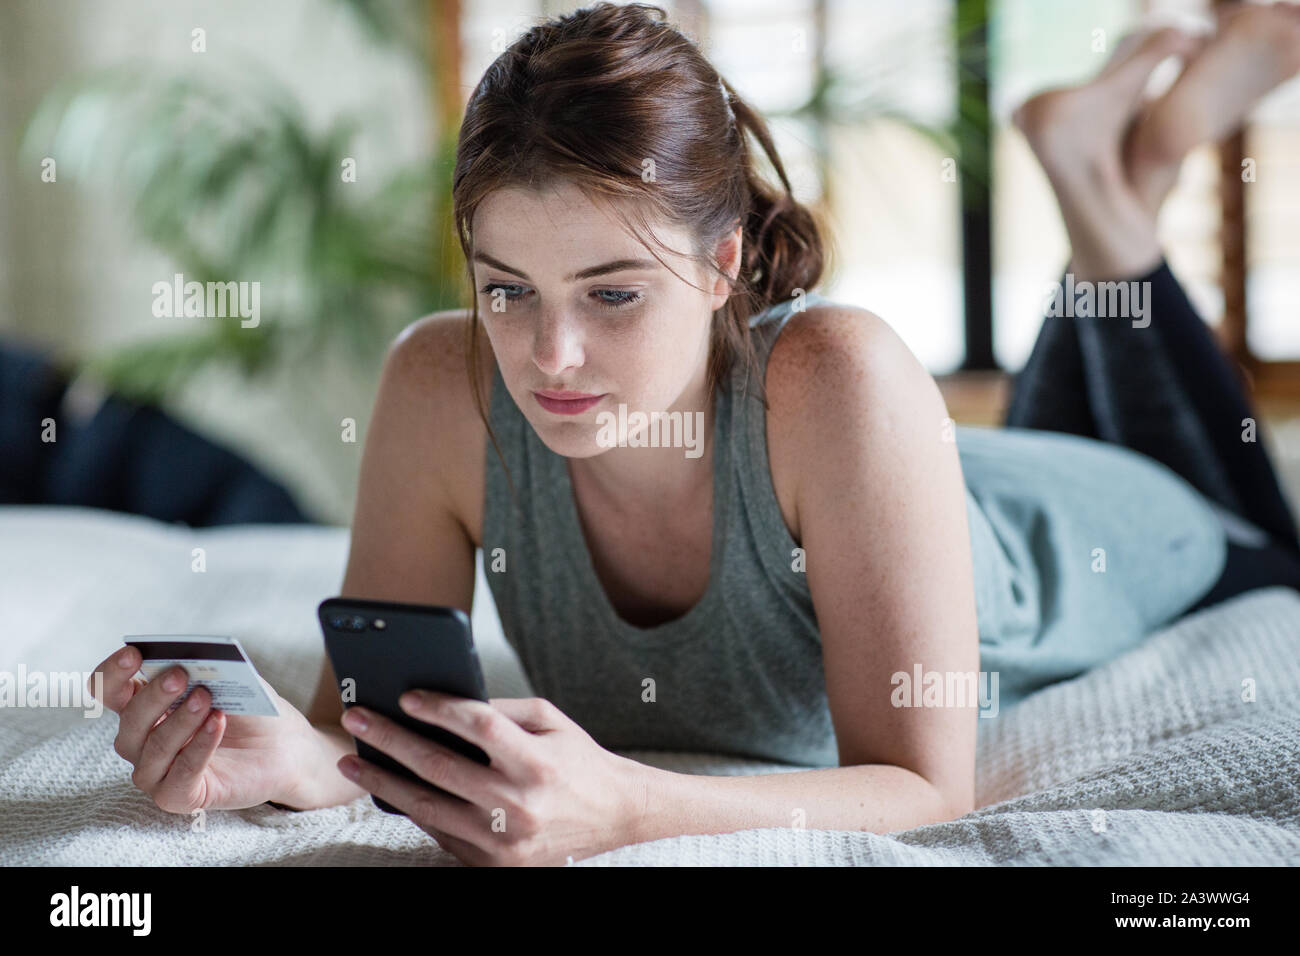 Young adult female shopping on smartphone Stock Photo